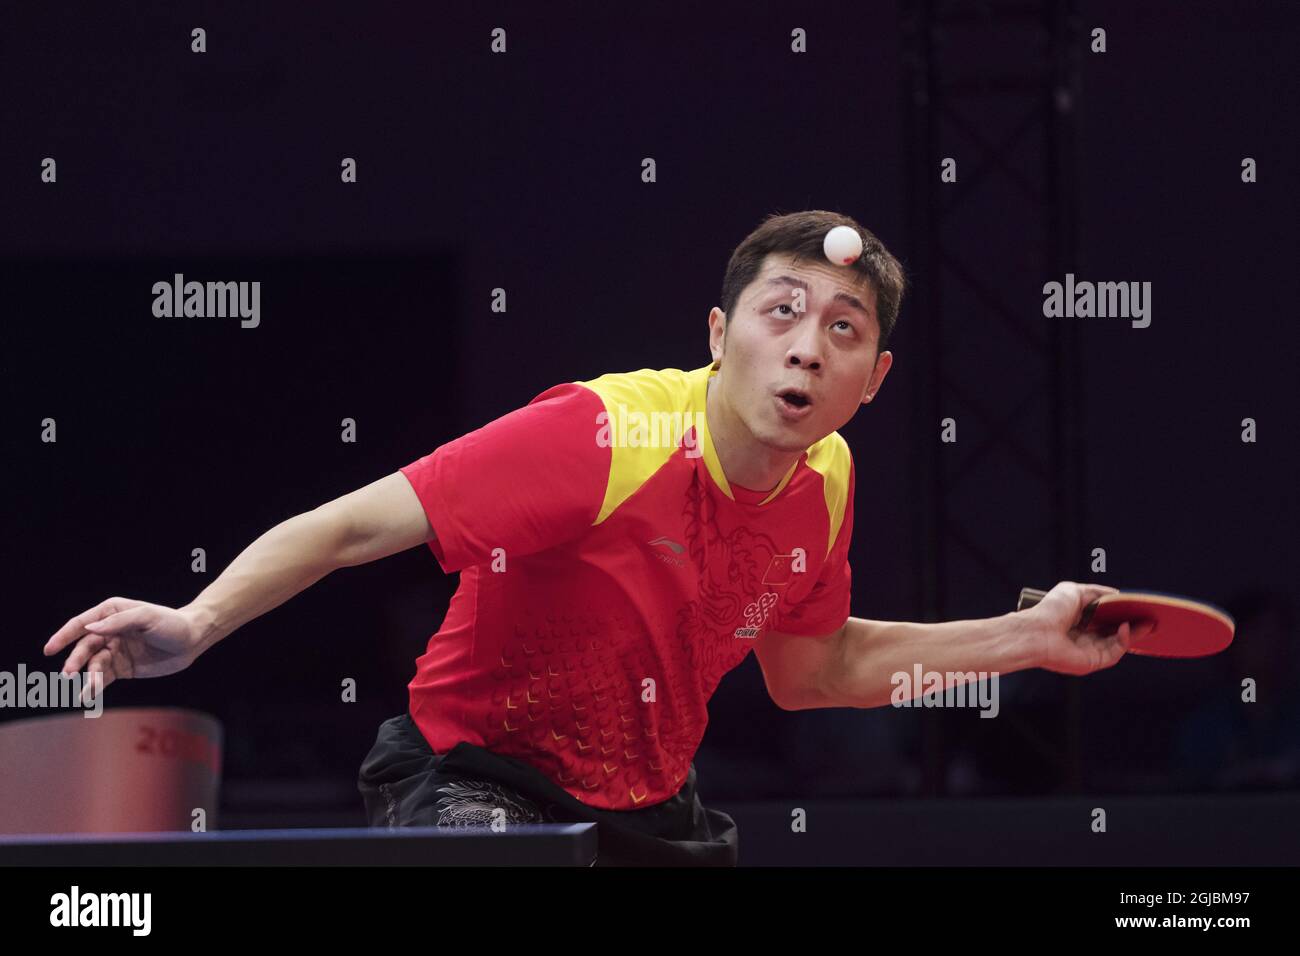 Xu Xin of China in action against Jang Woojin of South Korea during the men's quarterfinal table tennis match at the Swedish Open Championships in Eriksdalshallen in Stockholm, Sweden, on Nov. 03, 2018. Photo: Stina Stjernkvist / TT / code 11610  Stock Photo